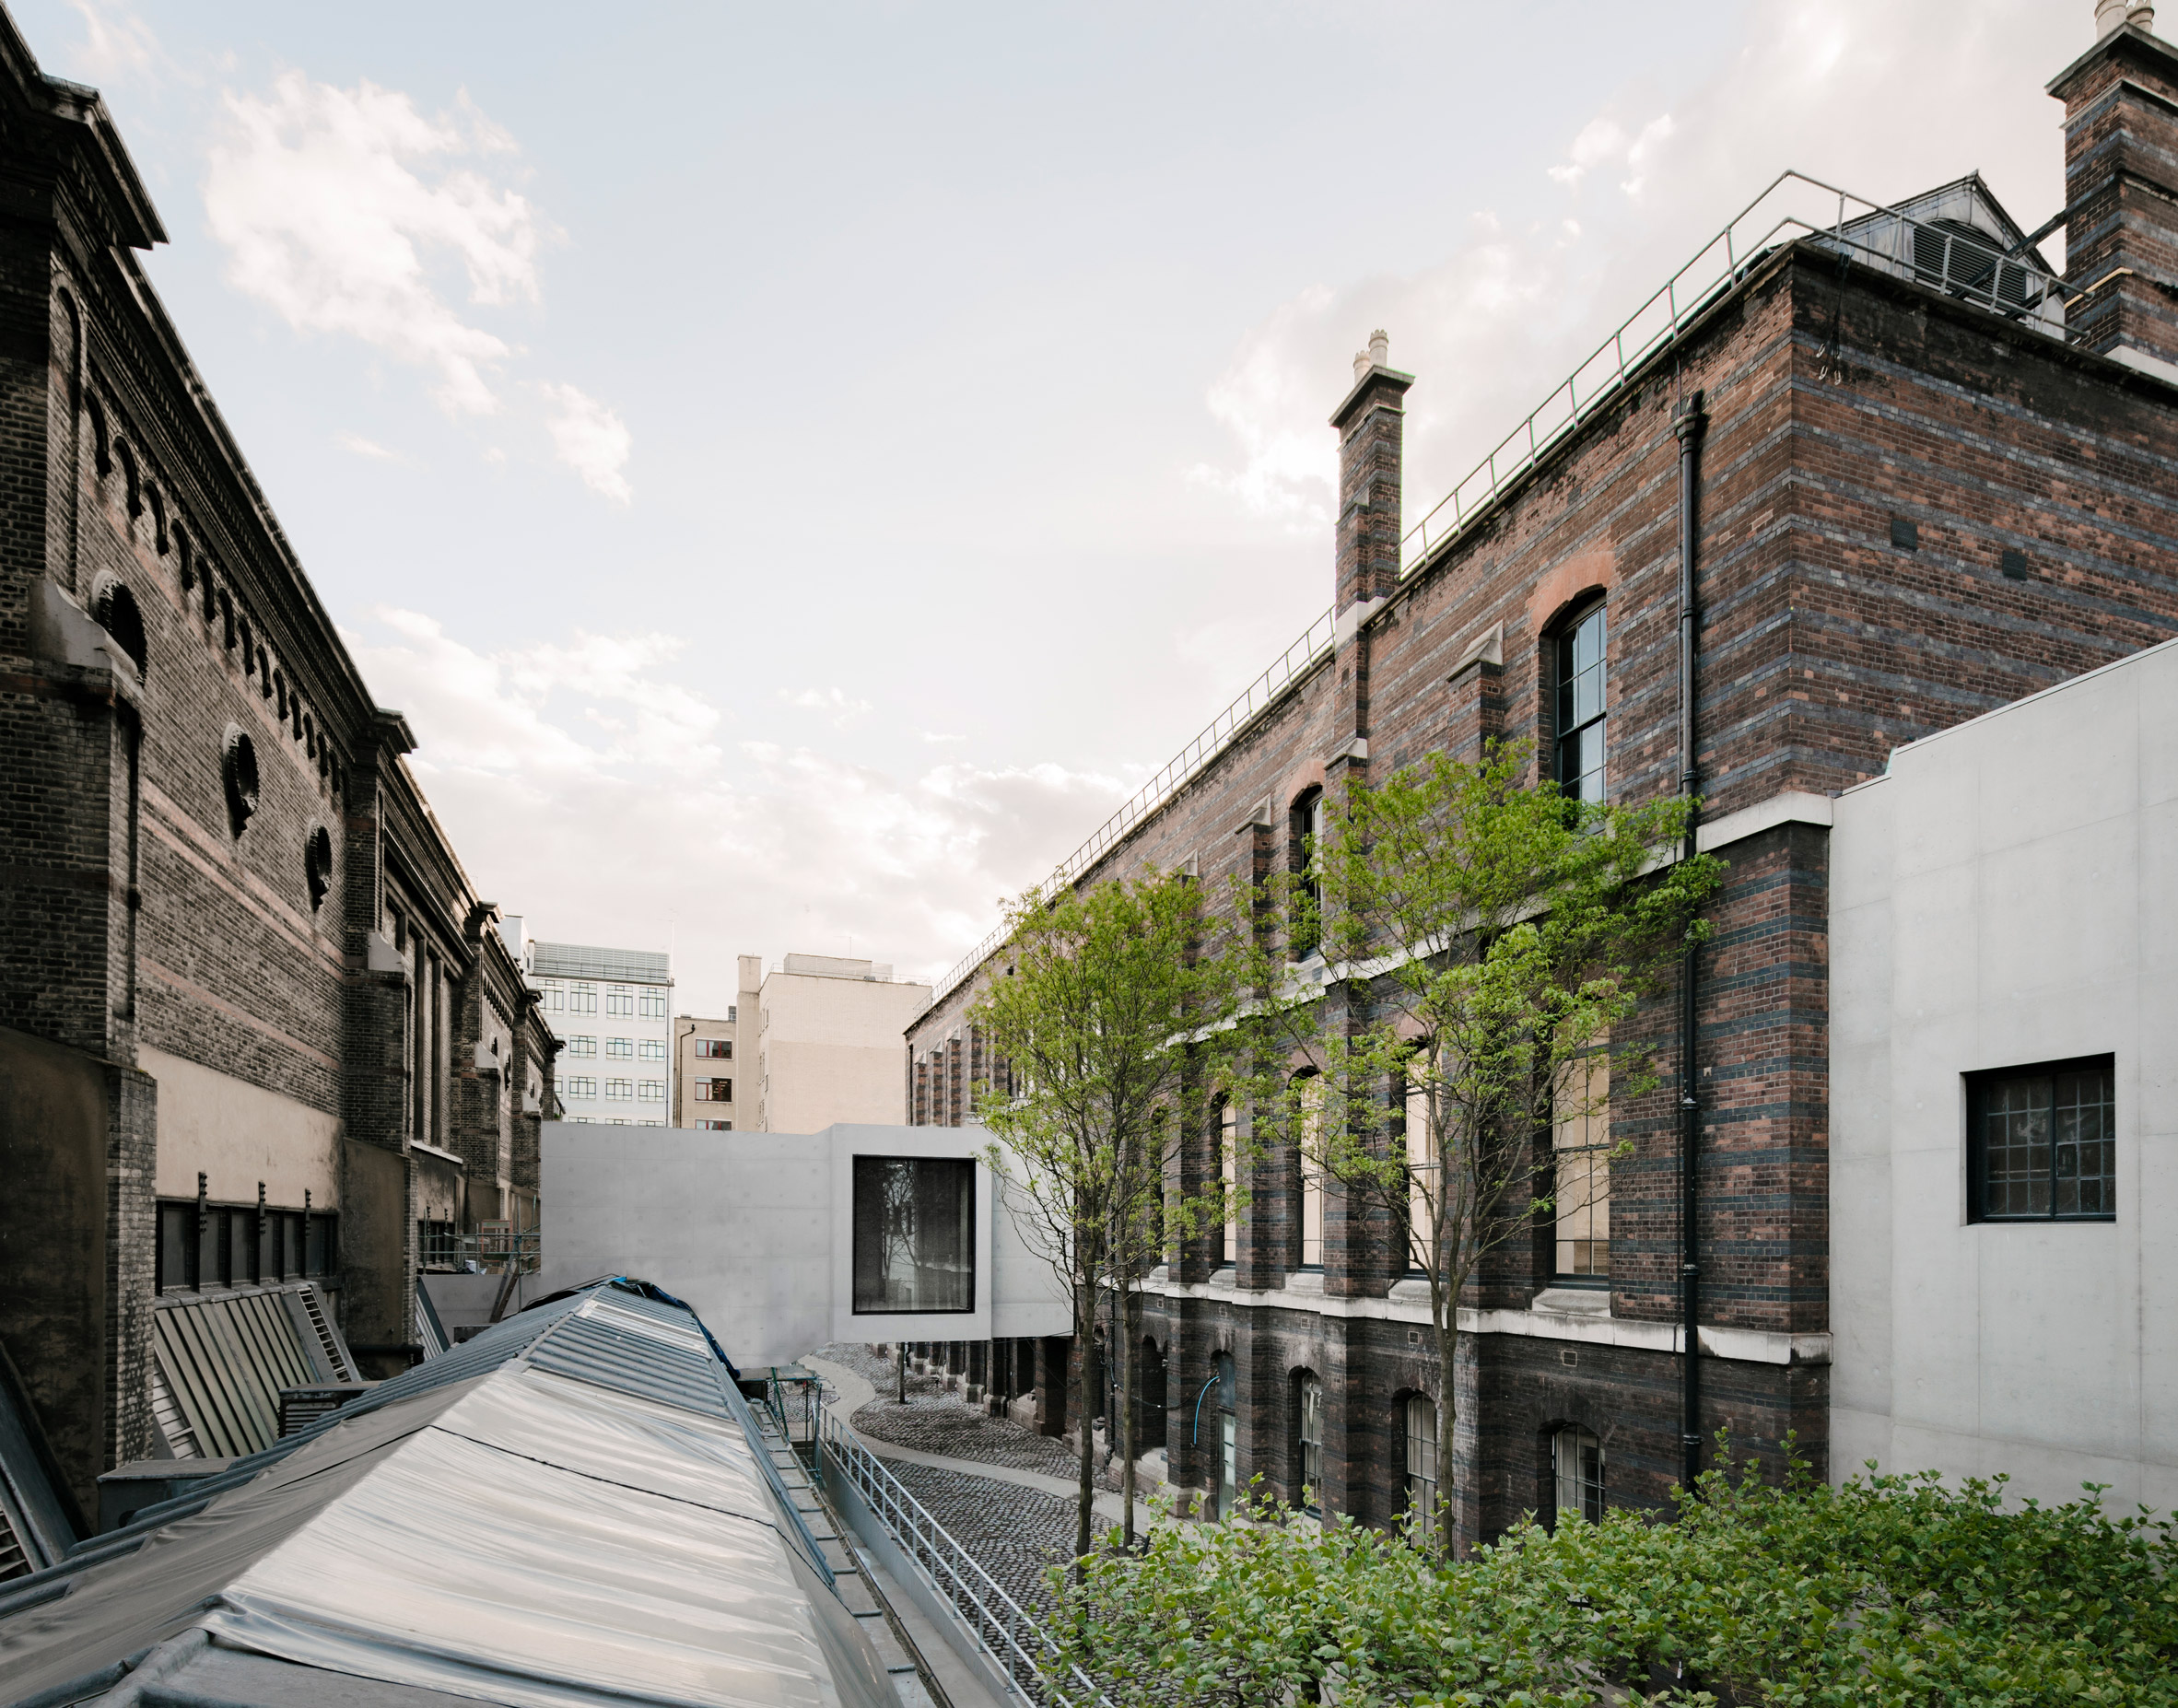 David Chipperfield's extension to London's Royal Academy